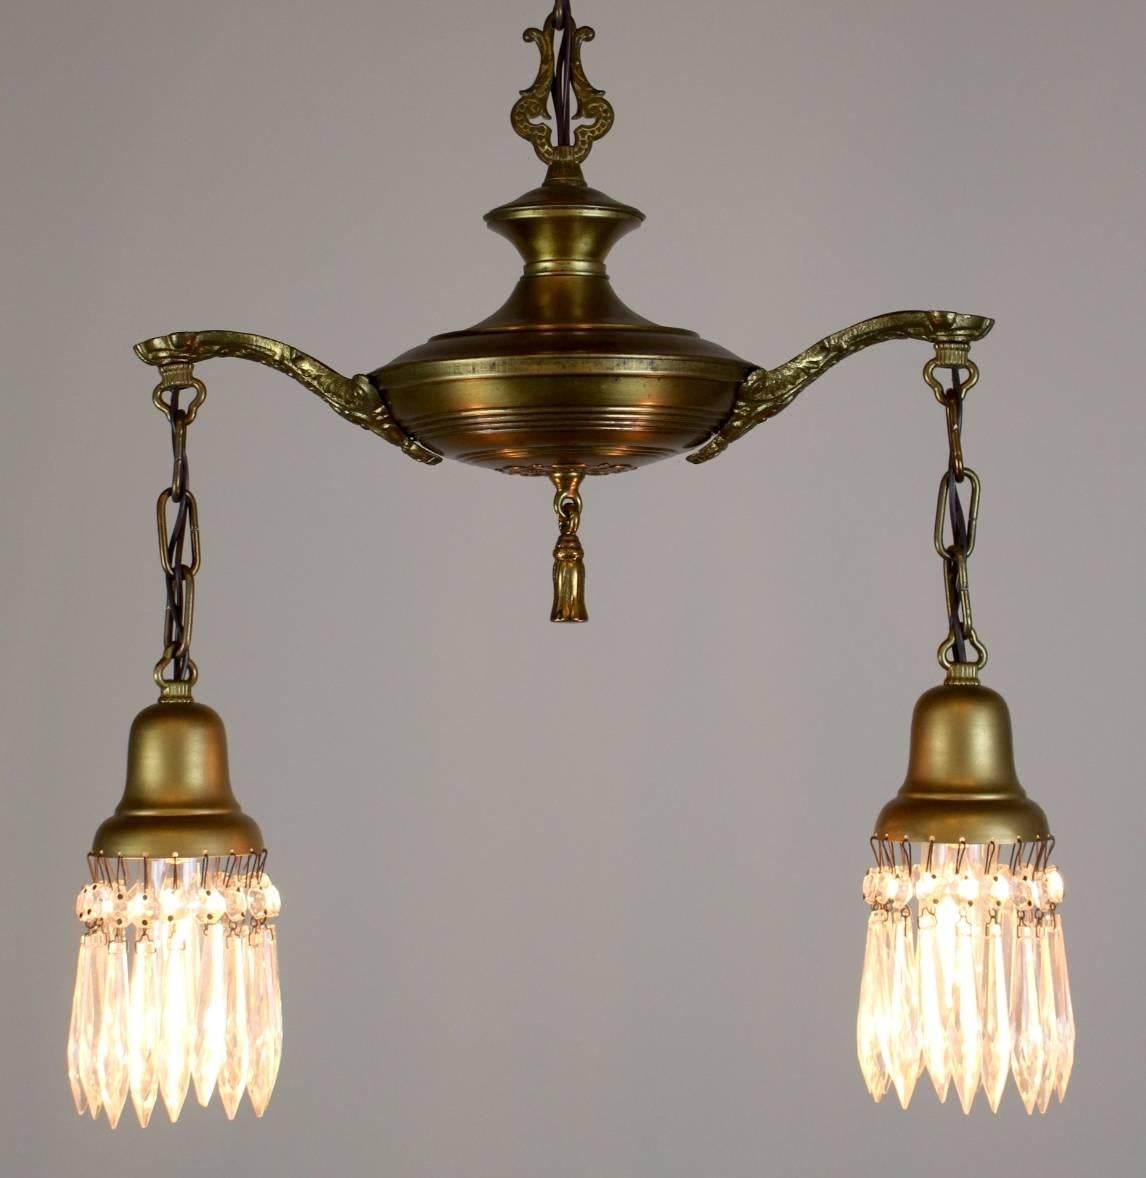 Two-Light Colonial Revival Style Pan Fixture with Crystal In Excellent Condition For Sale In Vancouver, BC